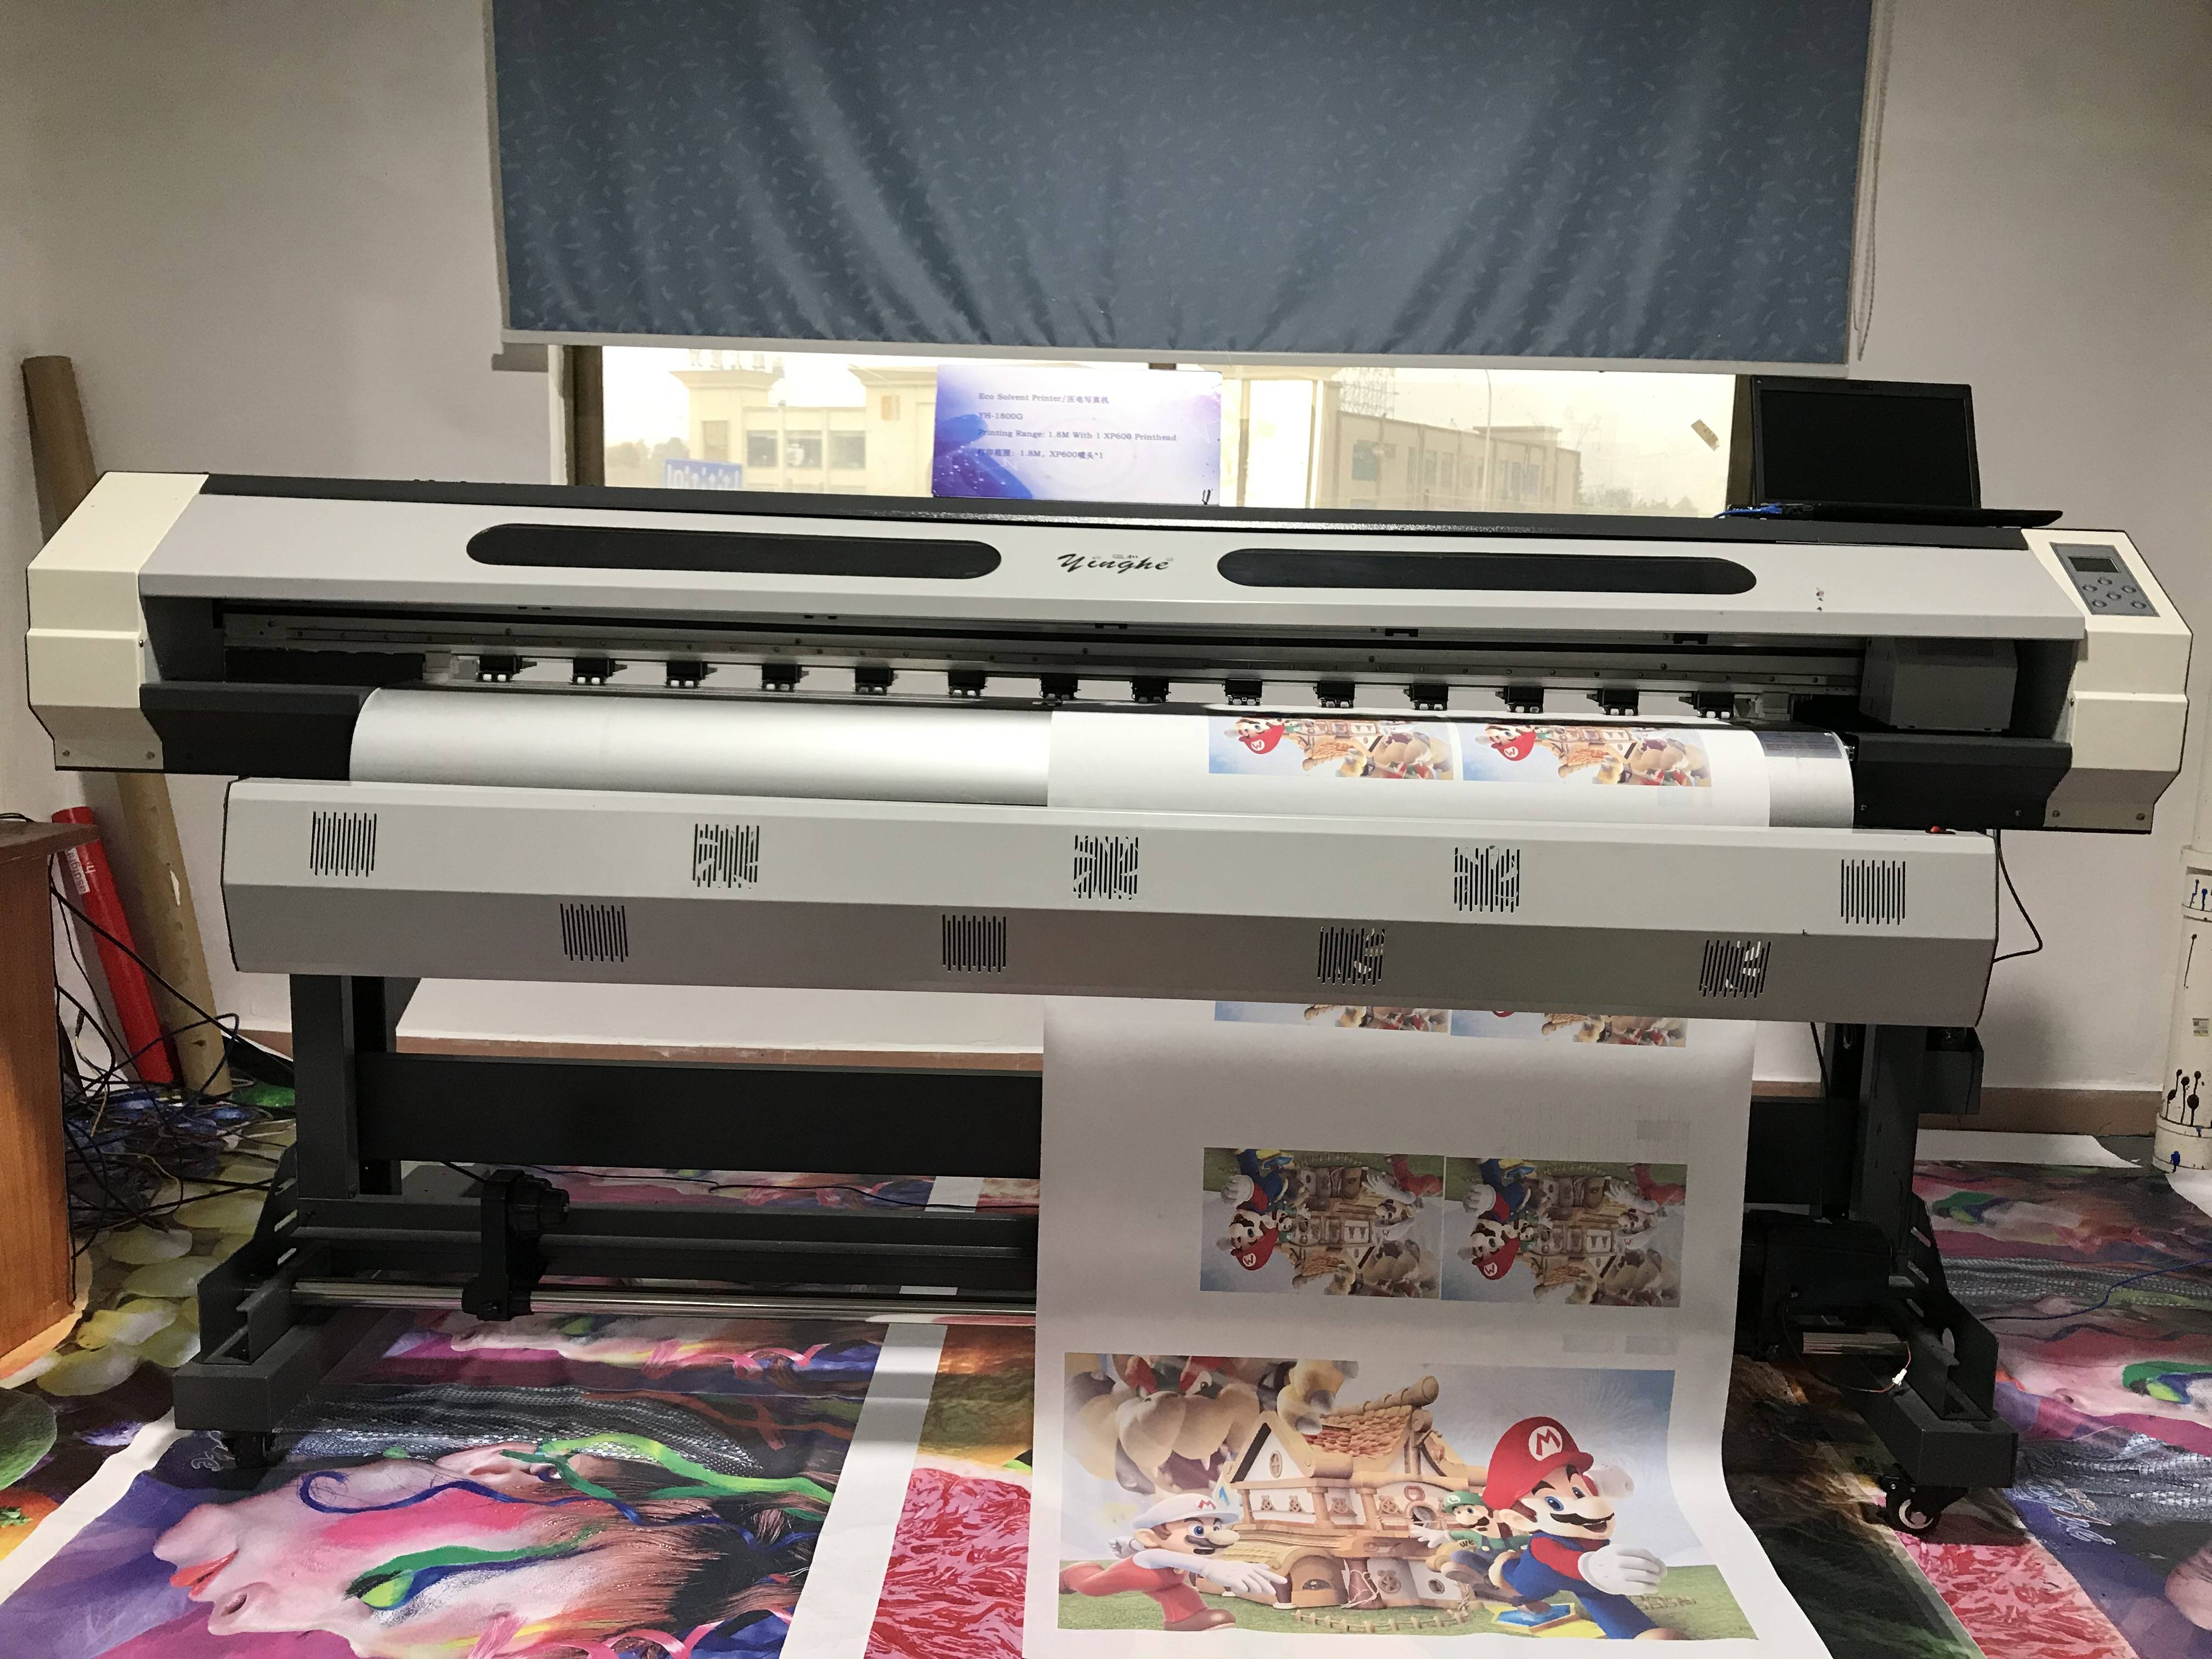 Large format printers are inseparable from these industry applications